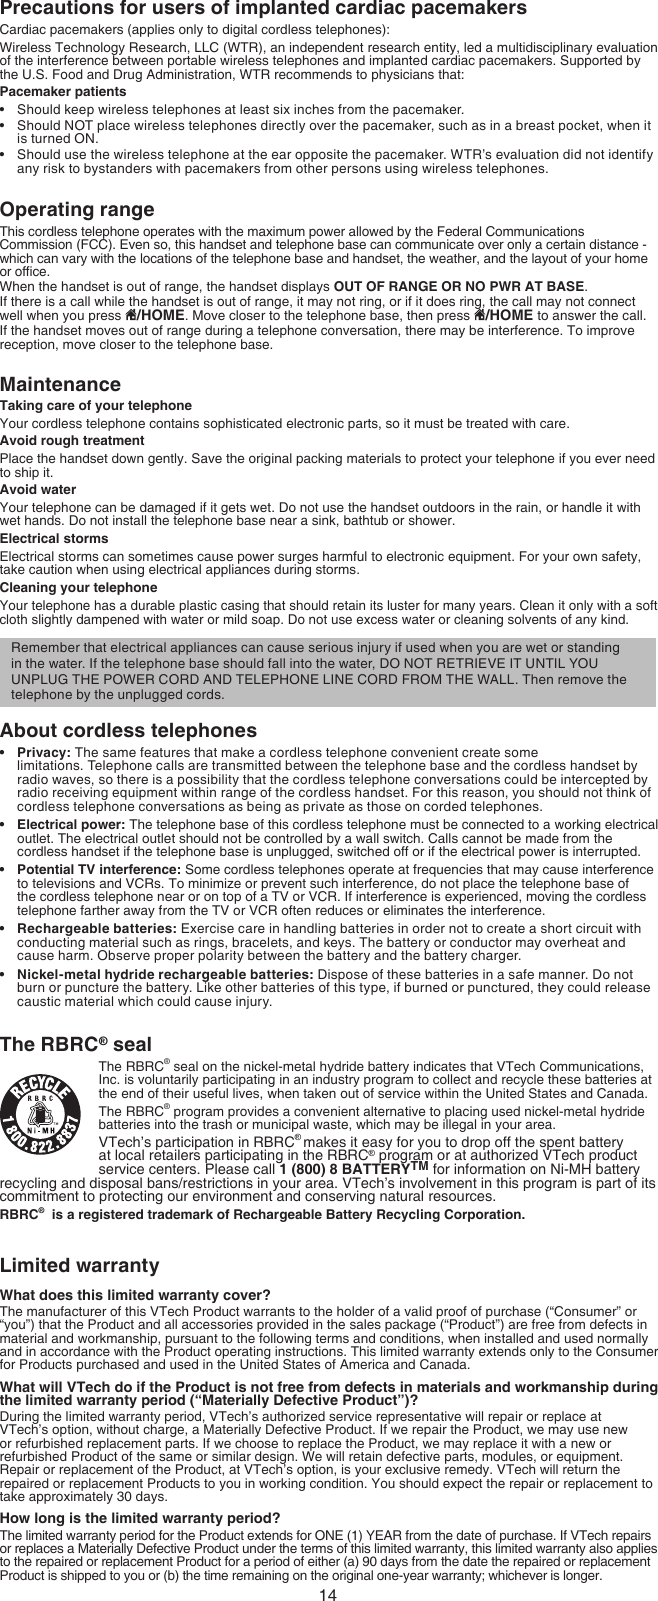 14Precautions for users of implanted cardiac pacemakersCardiac pacemakers (applies only to digital cordless telephones):Wireless Technology Research, LLC (WTR), an independent research entity, led a multidisciplinary evaluation of the interference between portable wireless telephones and implanted cardiac pacemakers. Supported by the U.S. Food and Drug Administration, WTR recommends to physicians that:Pacemaker patientsShould keep wireless telephones at least six inches from the pacemaker.Should NOT place wireless telephones directly over the pacemaker, such as in a breast pocket, when it is turned ON.Should use the wireless telephone at the ear opposite the pacemaker. WTR’s evaluation did not identify any risk to bystanders with pacemakers from other persons using wireless telephones.Operating rangeThis cordless telephone operates with the maximum power allowed by the Federal Communications Commission (FCC). Even so, this handset and telephone base can communicate over only a certain distance -  which can vary with the locations of the telephone base and handset, the weather, and the layout of your home or ofce. When the handset is out of range, the handset displays OUT OF RANGE OR NO PWR AT BASE.If there is a call while the handset is out of range, it may not ring, or if it does ring, the call may not connect well when you press  /HOME. Move closer to the telephone base, then press  /HOME to answer the call. If the handset moves out of range during a telephone conversation, there may be interference. To improve reception, move closer to the telephone base.MaintenanceTaking care of your telephoneYour cordless telephone contains sophisticated electronic parts, so it must be treated with care.Avoid rough treatmentPlace the handset down gently. Save the original packing materials to protect your telephone if you ever need to ship it.Avoid waterYour telephone can be damaged if it gets wet. Do not use the handset outdoors in the rain, or handle it with wet hands. Do not install the telephone base near a sink, bathtub or shower.Electrical stormsElectrical storms can sometimes cause power surges harmful to electronic equipment. For your own safety, take caution when using electrical appliances during storms.Cleaning your telephoneYour telephone has a durable plastic casing that should retain its luster for many years. Clean it only with a soft cloth slightly dampened with water or mild soap. Do not use excess water or cleaning solvents of any kind.About cordless telephonesPrivacy: The same features that make a cordless telephone convenient create some  limitations. Telephone calls are transmitted between the telephone base and the cordless handset by radio waves, so there is a possibility that the cordless telephone conversations could be intercepted by radio receiving equipment within range of the cordless handset. For this reason, you should not think of cordless telephone conversations as being as private as those on corded telephones.Electrical power: The telephone base of this cordless telephone must be connected to a working electrical outlet. The electrical outlet should not be controlled by a wall switch. Calls cannot be made from the cordless handset if the telephone base is unplugged, switched off or if the electrical power is interrupted.Potential TV interference: Some cordless telephones operate at frequencies that may cause interference to televisions and VCRs. To minimize or prevent such interference, do not place the telephone base of the cordless telephone near or on top of a TV or VCR. If interference is experienced, moving the cordless telephone farther away from the TV or VCR often reduces or eliminates the interference.Rechargeable batteries: Exercise care in handling batteries in order not to create a short circuit with conducting material such as rings, bracelets, and keys. The battery or conductor may overheat and cause harm. Observe proper polarity between the battery and the battery charger.Nickel-metal hydride rechargeable batteries: Dispose of these batteries in a safe manner. Do not burn or puncture the battery. Like other batteries of this type, if burned or punctured, they could release caustic material which could cause injury.The RBRC® sealThe RBRC® seal on the nickel-metal hydride battery indicates that VTech Communications, Inc. is voluntarily participating in an industry program to collect and recycle these batteries at the end of their useful lives, when taken out of service within the United States and Canada.The RBRC® program provides a convenient alternative to placing used nickel-metal hydride batteries into the trash or municipal waste, which may be illegal in your area.VTech’s participation in RBRC® makes it easy for you to drop off the spent battery at local retailers participating in the RBRC® program or at authorized VTech product service centers. Please call 1 (800) 8 BATTERYTM for information on Ni-MH battery recycling and disposal bans/restrictions in your area. VTech’s involvement in this program is part of its commitment to protecting our environment and conserving natural resources.RBRC®  is a registered trademark of Rechargeable Battery Recycling Corporation.Limited warrantyWhat does this limited warranty cover?The manufacturer of this VTech Product warrants to the holder of a valid proof of purchase (“Consumer” or “you”) that the Product and all accessories provided in the sales package (“Product”) are free from defects in material and workmanship, pursuant to the following terms and conditions, when installed and used normally and in accordance with the Product operating instructions. This limited warranty extends only to the Consumer for Products purchased and used in the United States of America and Canada.What will VTech do if the Product is not free from defects in materials and workmanship during the limited warranty period (“Materially Defective Product”)?During the limited warranty period, VTech’s authorized service representative will repair or replace at VTech’s option, without charge, a Materially Defective Product. If we repair the Product, we may use new or refurbished replacement parts. If we choose to replace the Product, we may replace it with a new or refurbished Product of the same or similar design. We will retain defective parts, modules, or equipment. Repair or replacement of the Product, at VTech’s option, is your exclusive remedy. VTech will return the repaired or replacement Products to you in working condition. You should expect the repair or replacement to take approximately 30 days.How long is the limited warranty period?The limited warranty period for the Product extends for ONE (1) YEAR from the date of purchase. If VTech repairs or replaces a Materially Defective Product under the terms of this limited warranty, this limited warranty also applies to the repaired or replacement Product for a period of either (a) 90 days from the date the repaired or replacement Product is shipped to you or (b) the time remaining on the original one-year warranty; whichever is longer.••••••••Remember that electrical appliances can cause serious injury if used when you are wet or standing in the water. If the telephone base should fall into the water, DO NOT RETRIEVE IT UNTIL YOU UNPLUG THE POWER CORD AND TELEPHONE LINE CORD FROM THE WALL. Then remove the telephone by the unplugged cords.